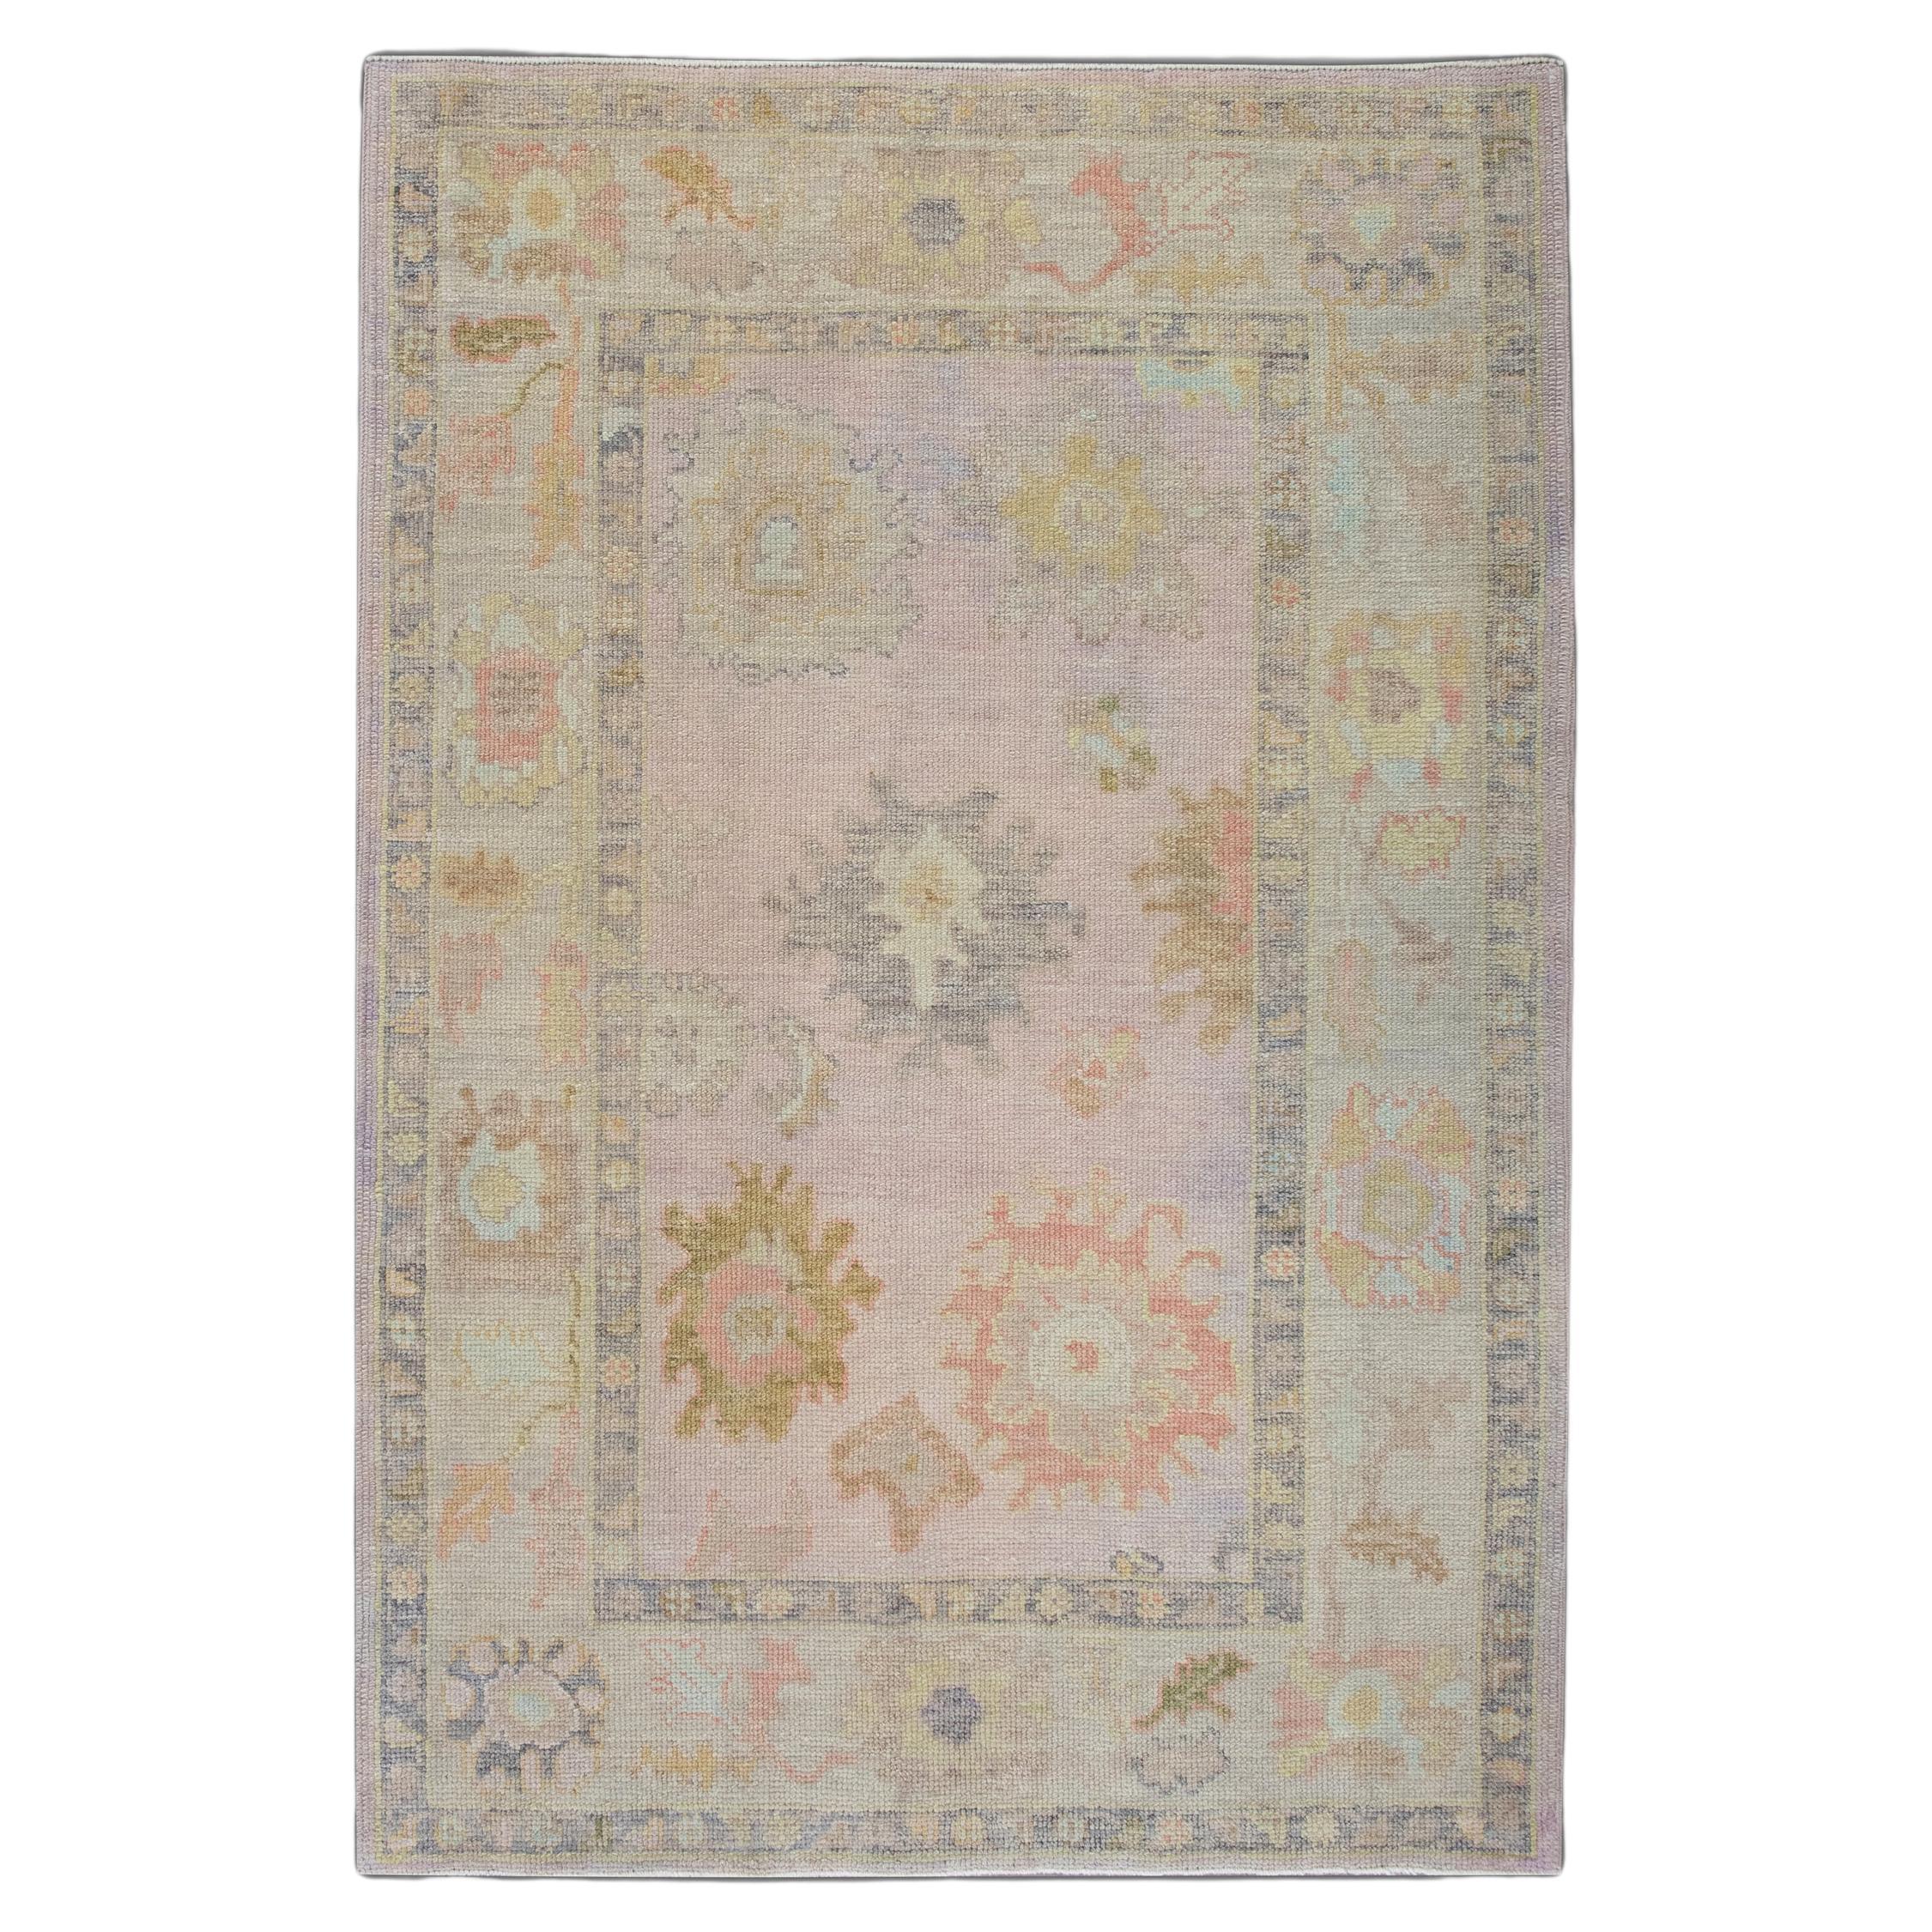 Handwoven Wool Turkish Oushak Rug w/ Colorful Pastel Floral Design 4'1" x 5'10" For Sale